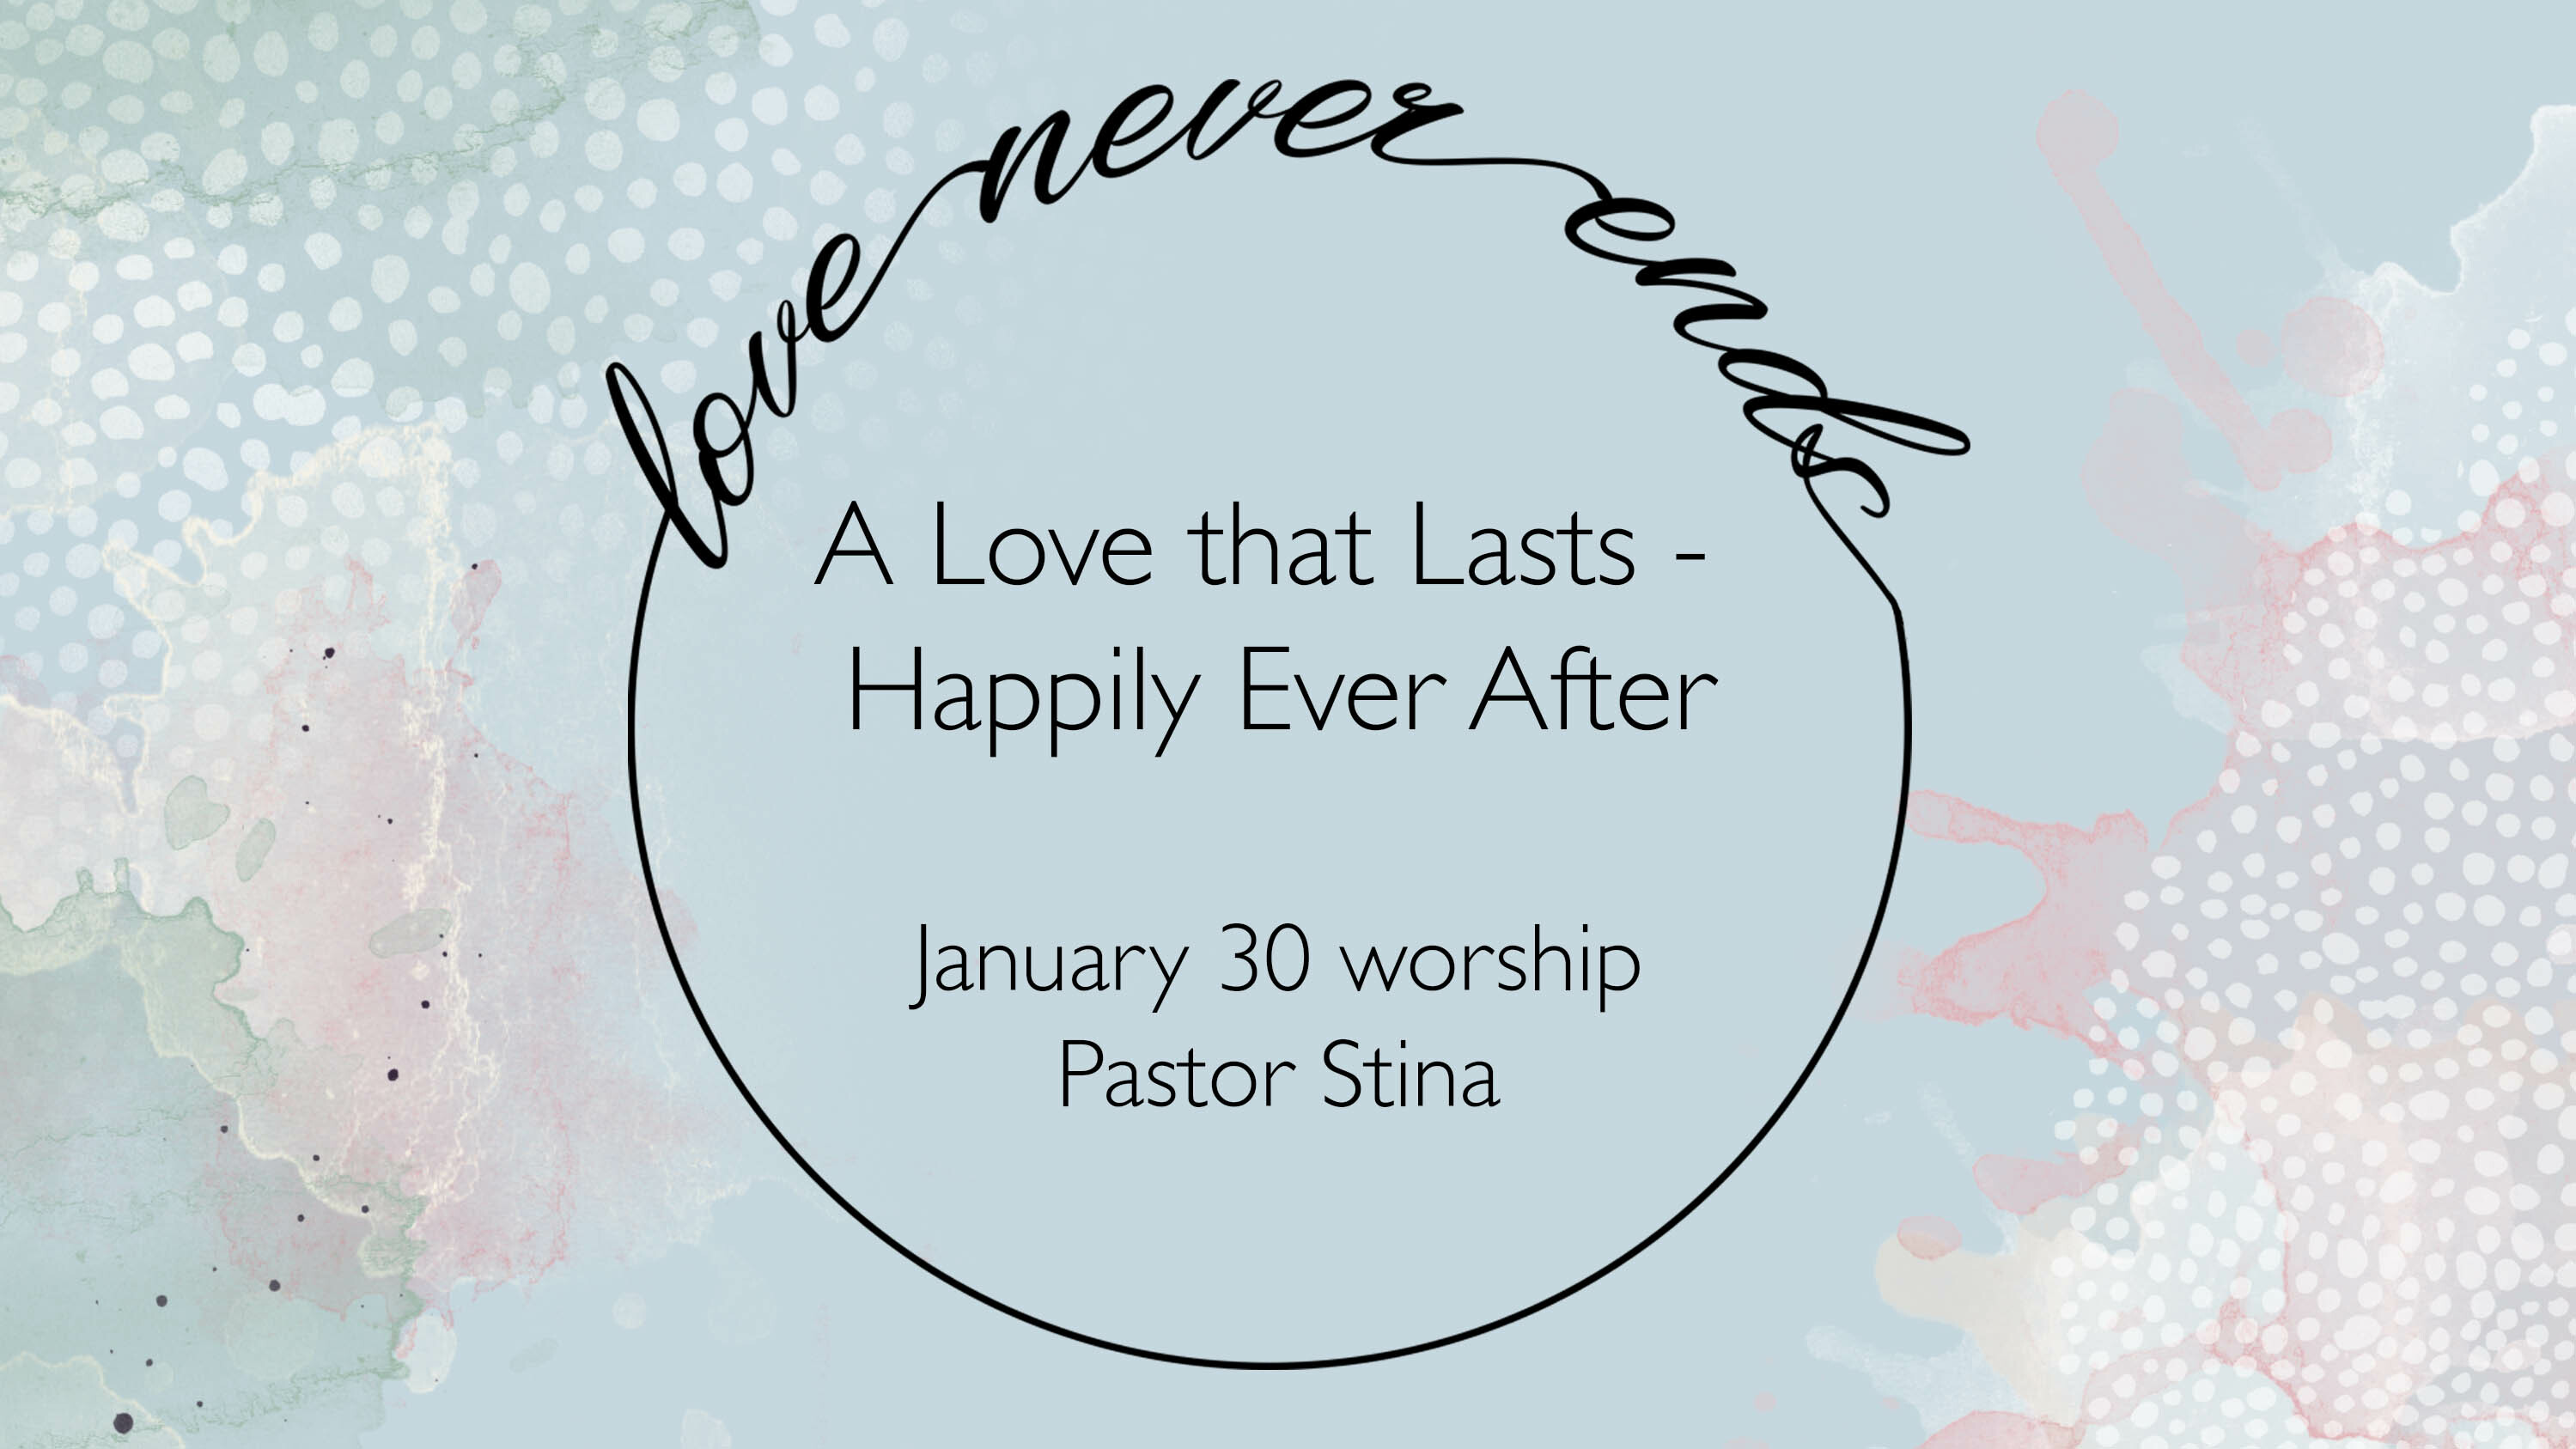 A Love That Lasts - Happily Ever After